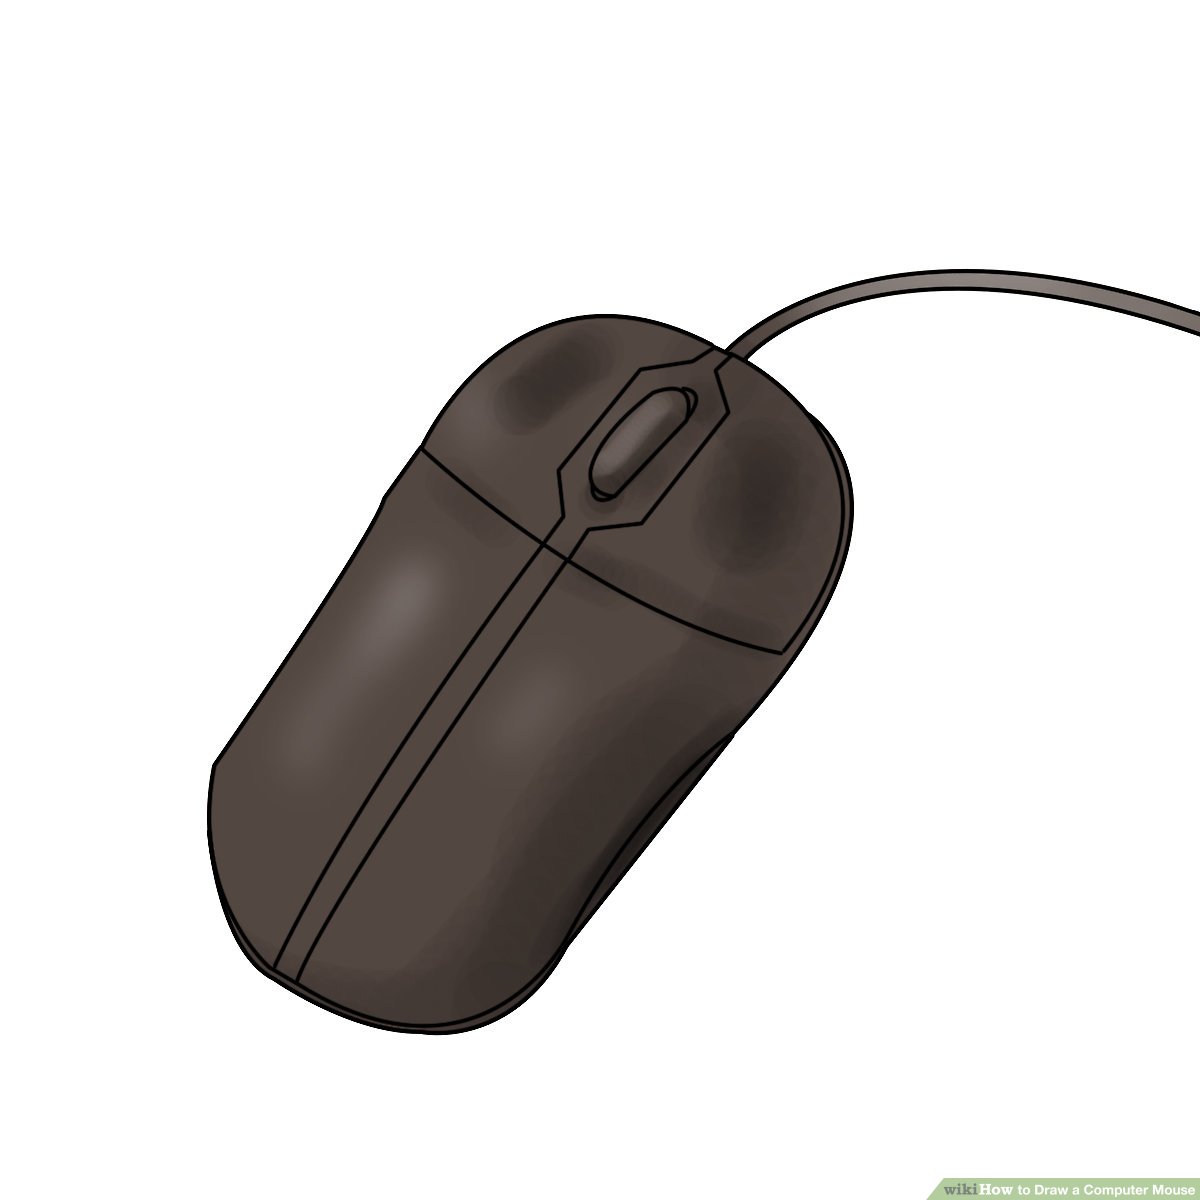 How to Draw a Computer Mouse